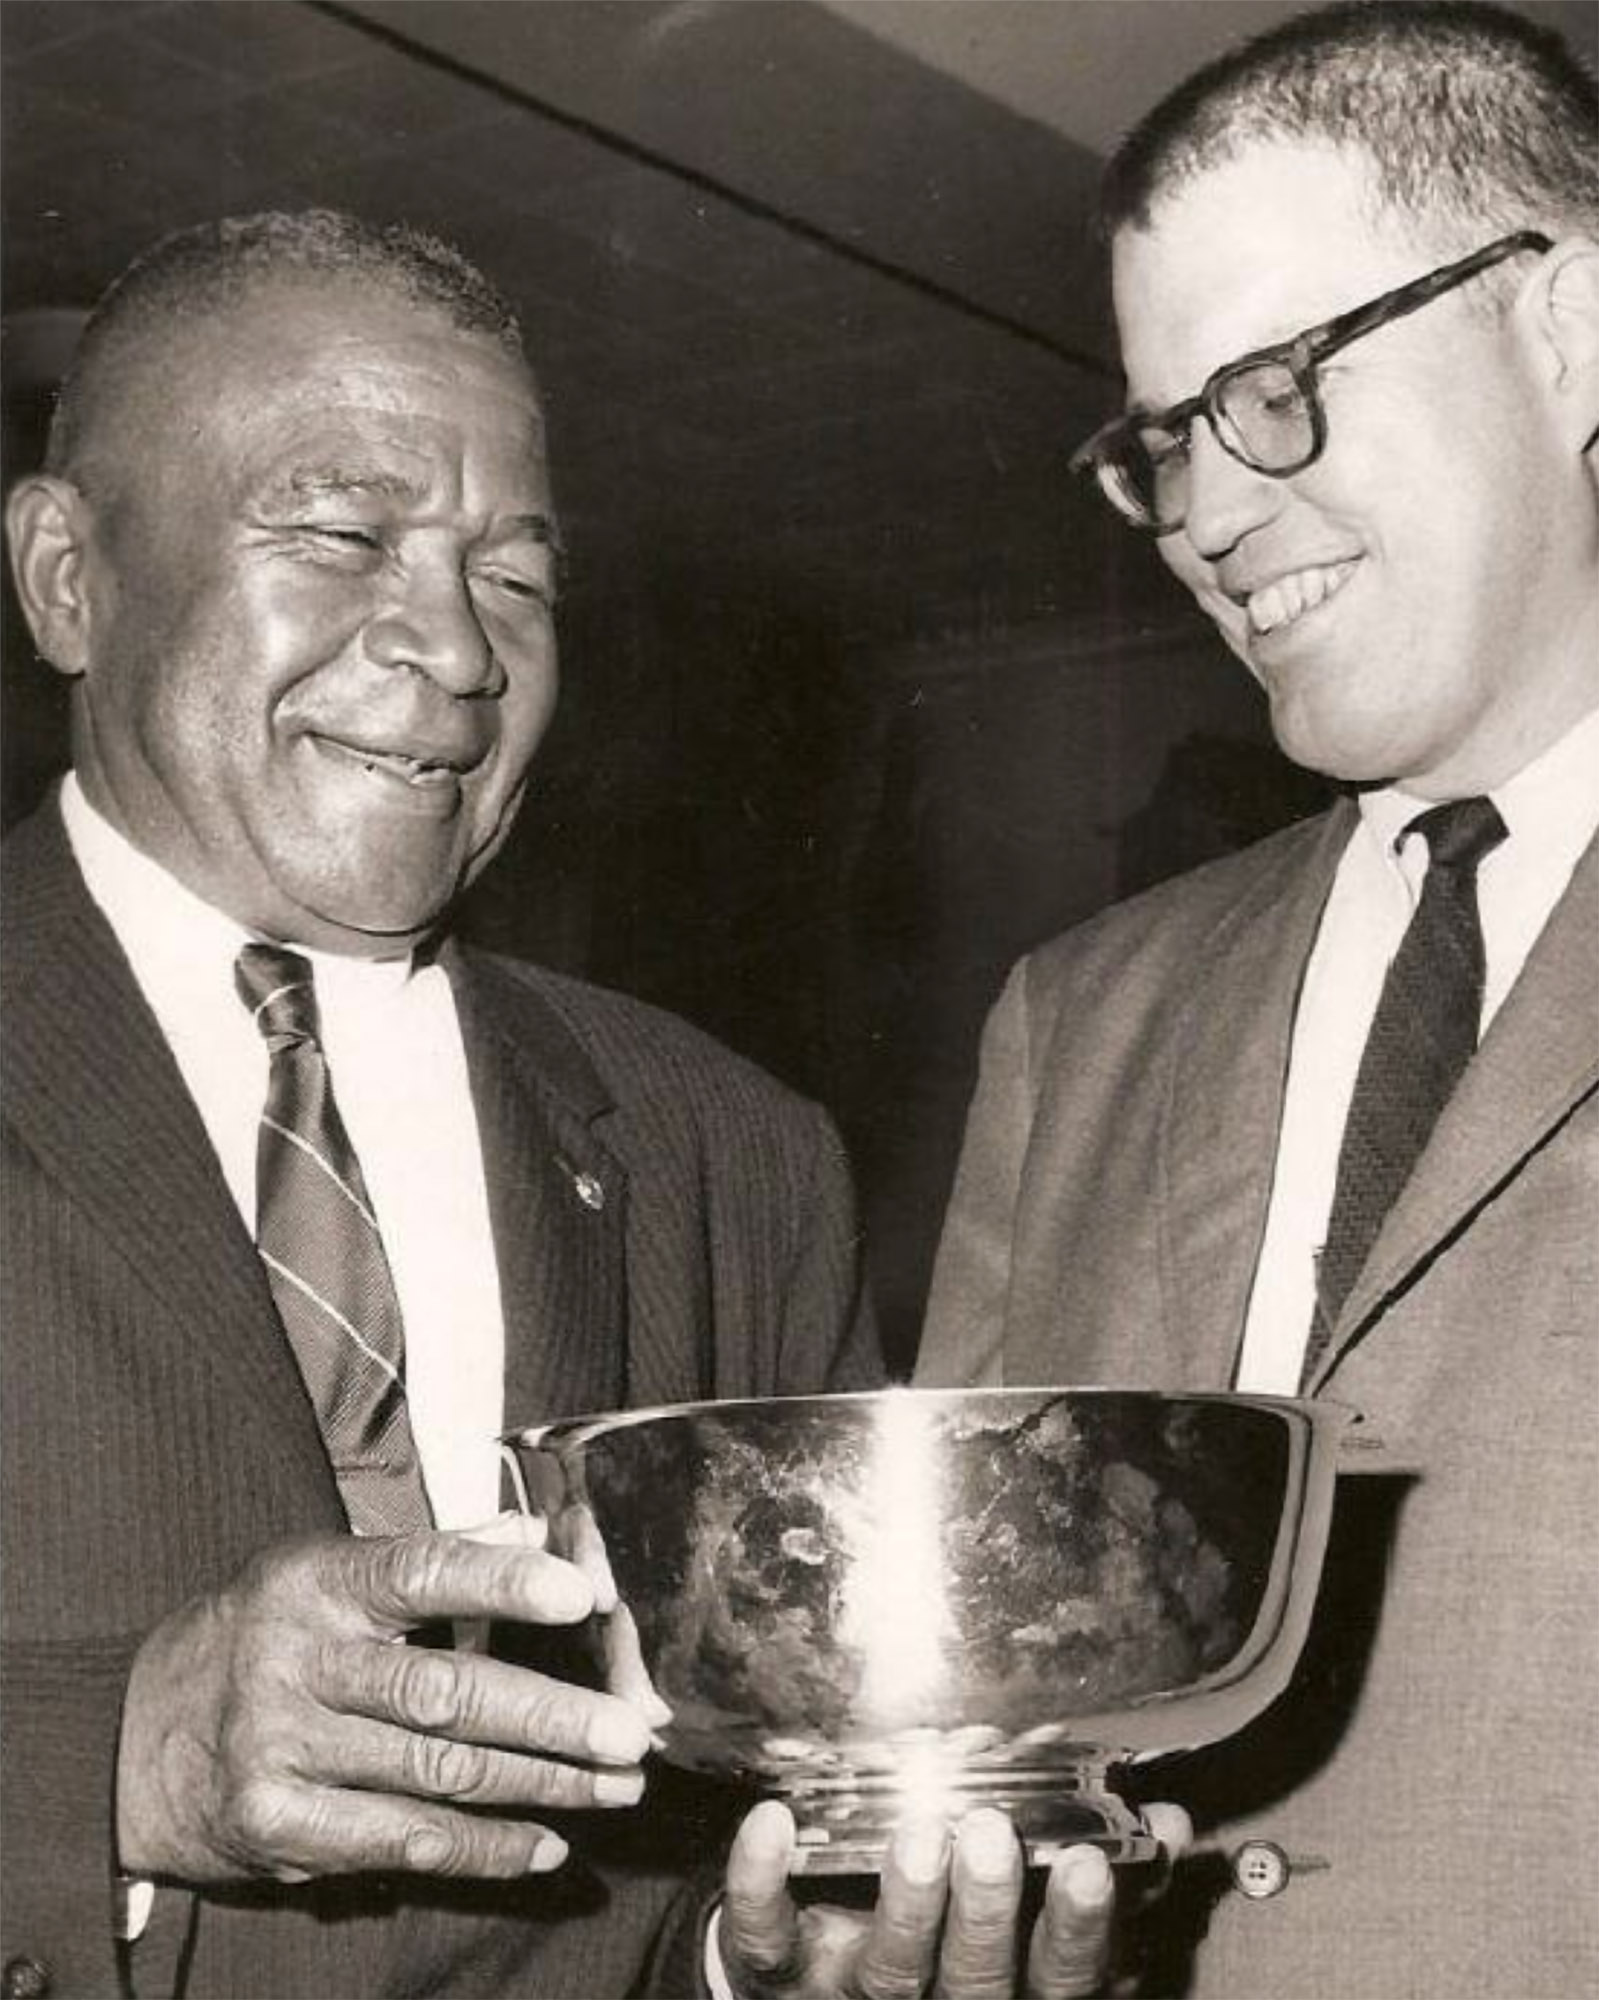 Randolph Lewis White, left, holding a medal cup with another man